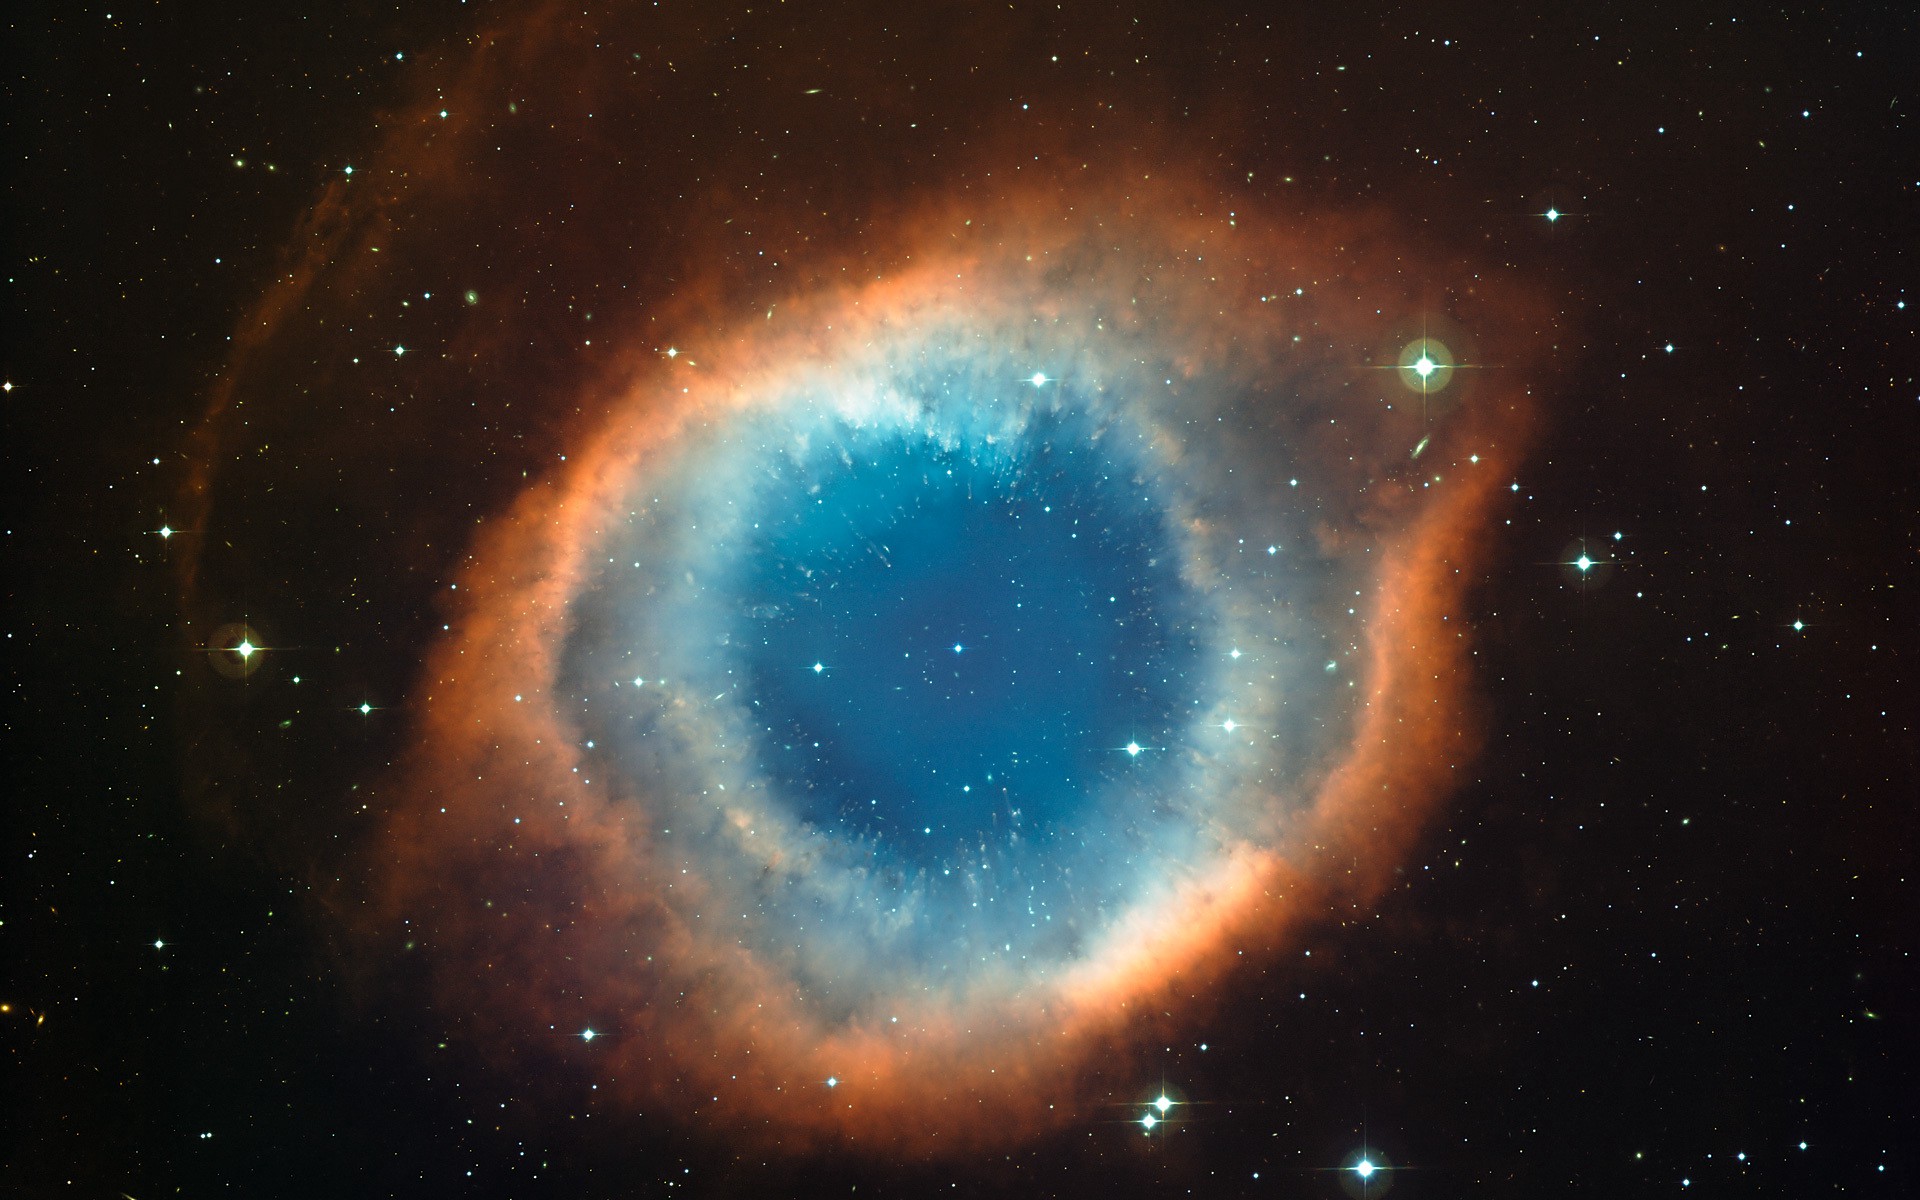 A circular nebula in space with a blue center surrounded by an orange rind, surrounded by stars.